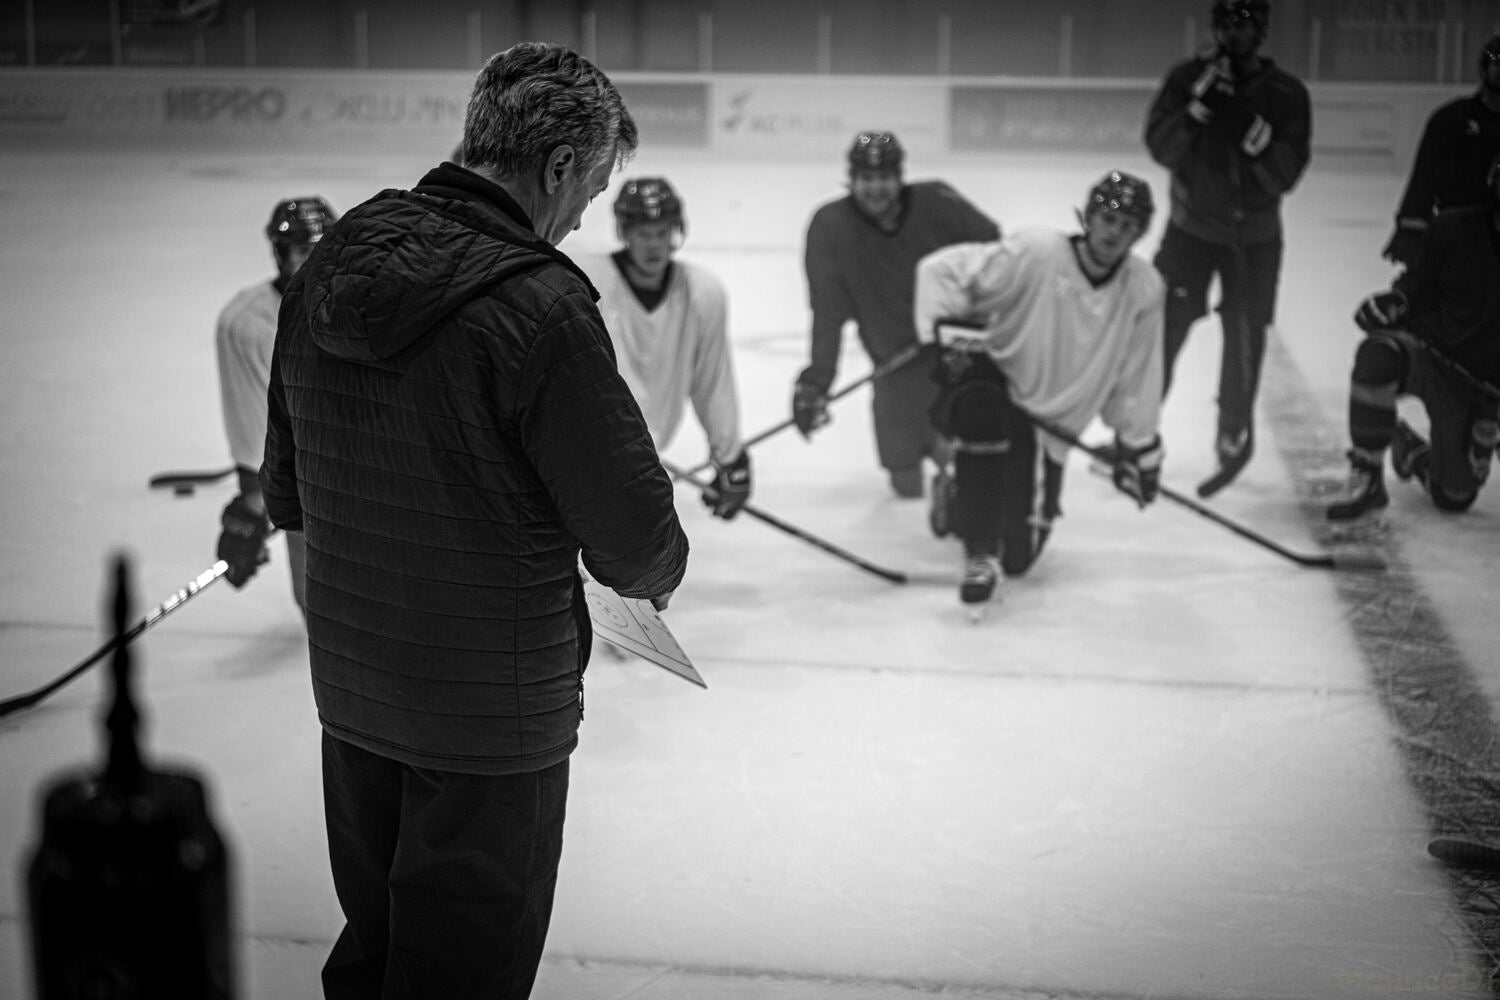 Behind the Bench: A Day in the Life of an Ice Hockey Coach